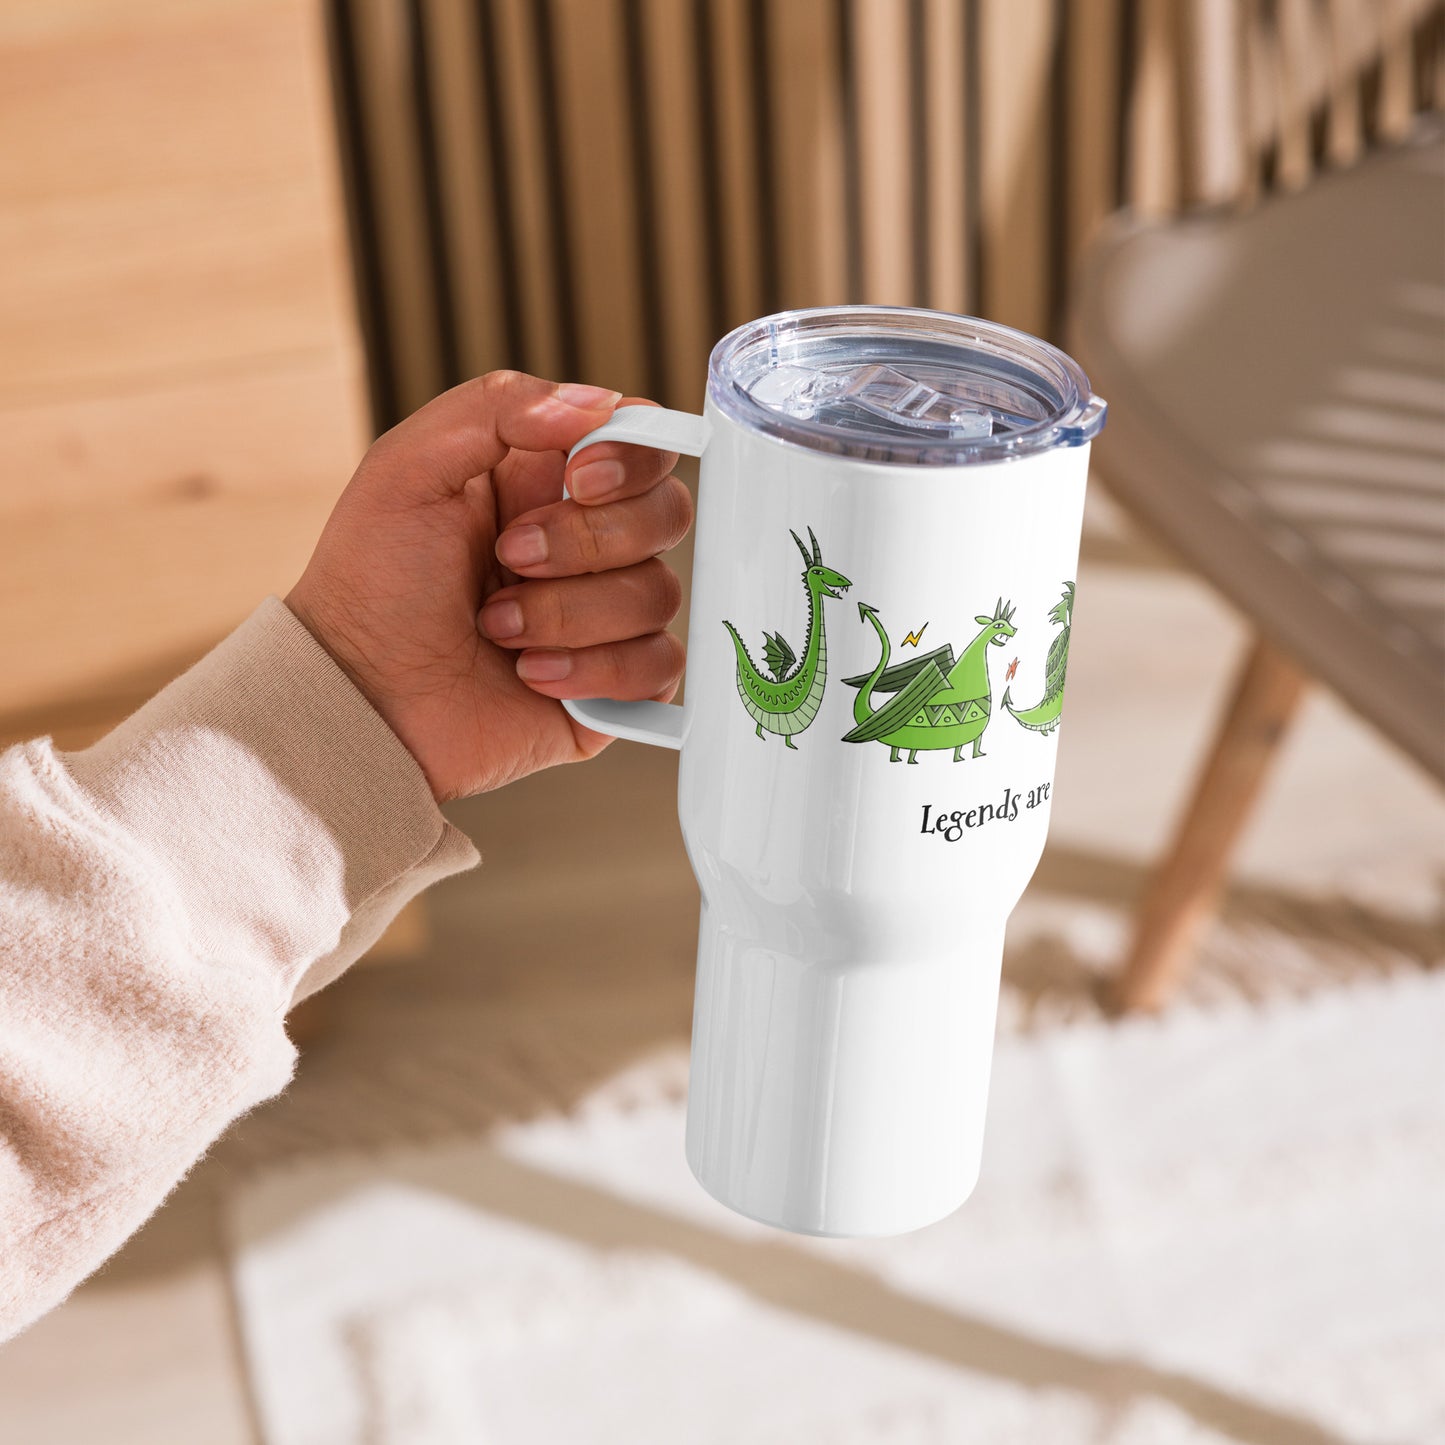 Personalised Travel mug with a handle. Funny Green Dragons print.